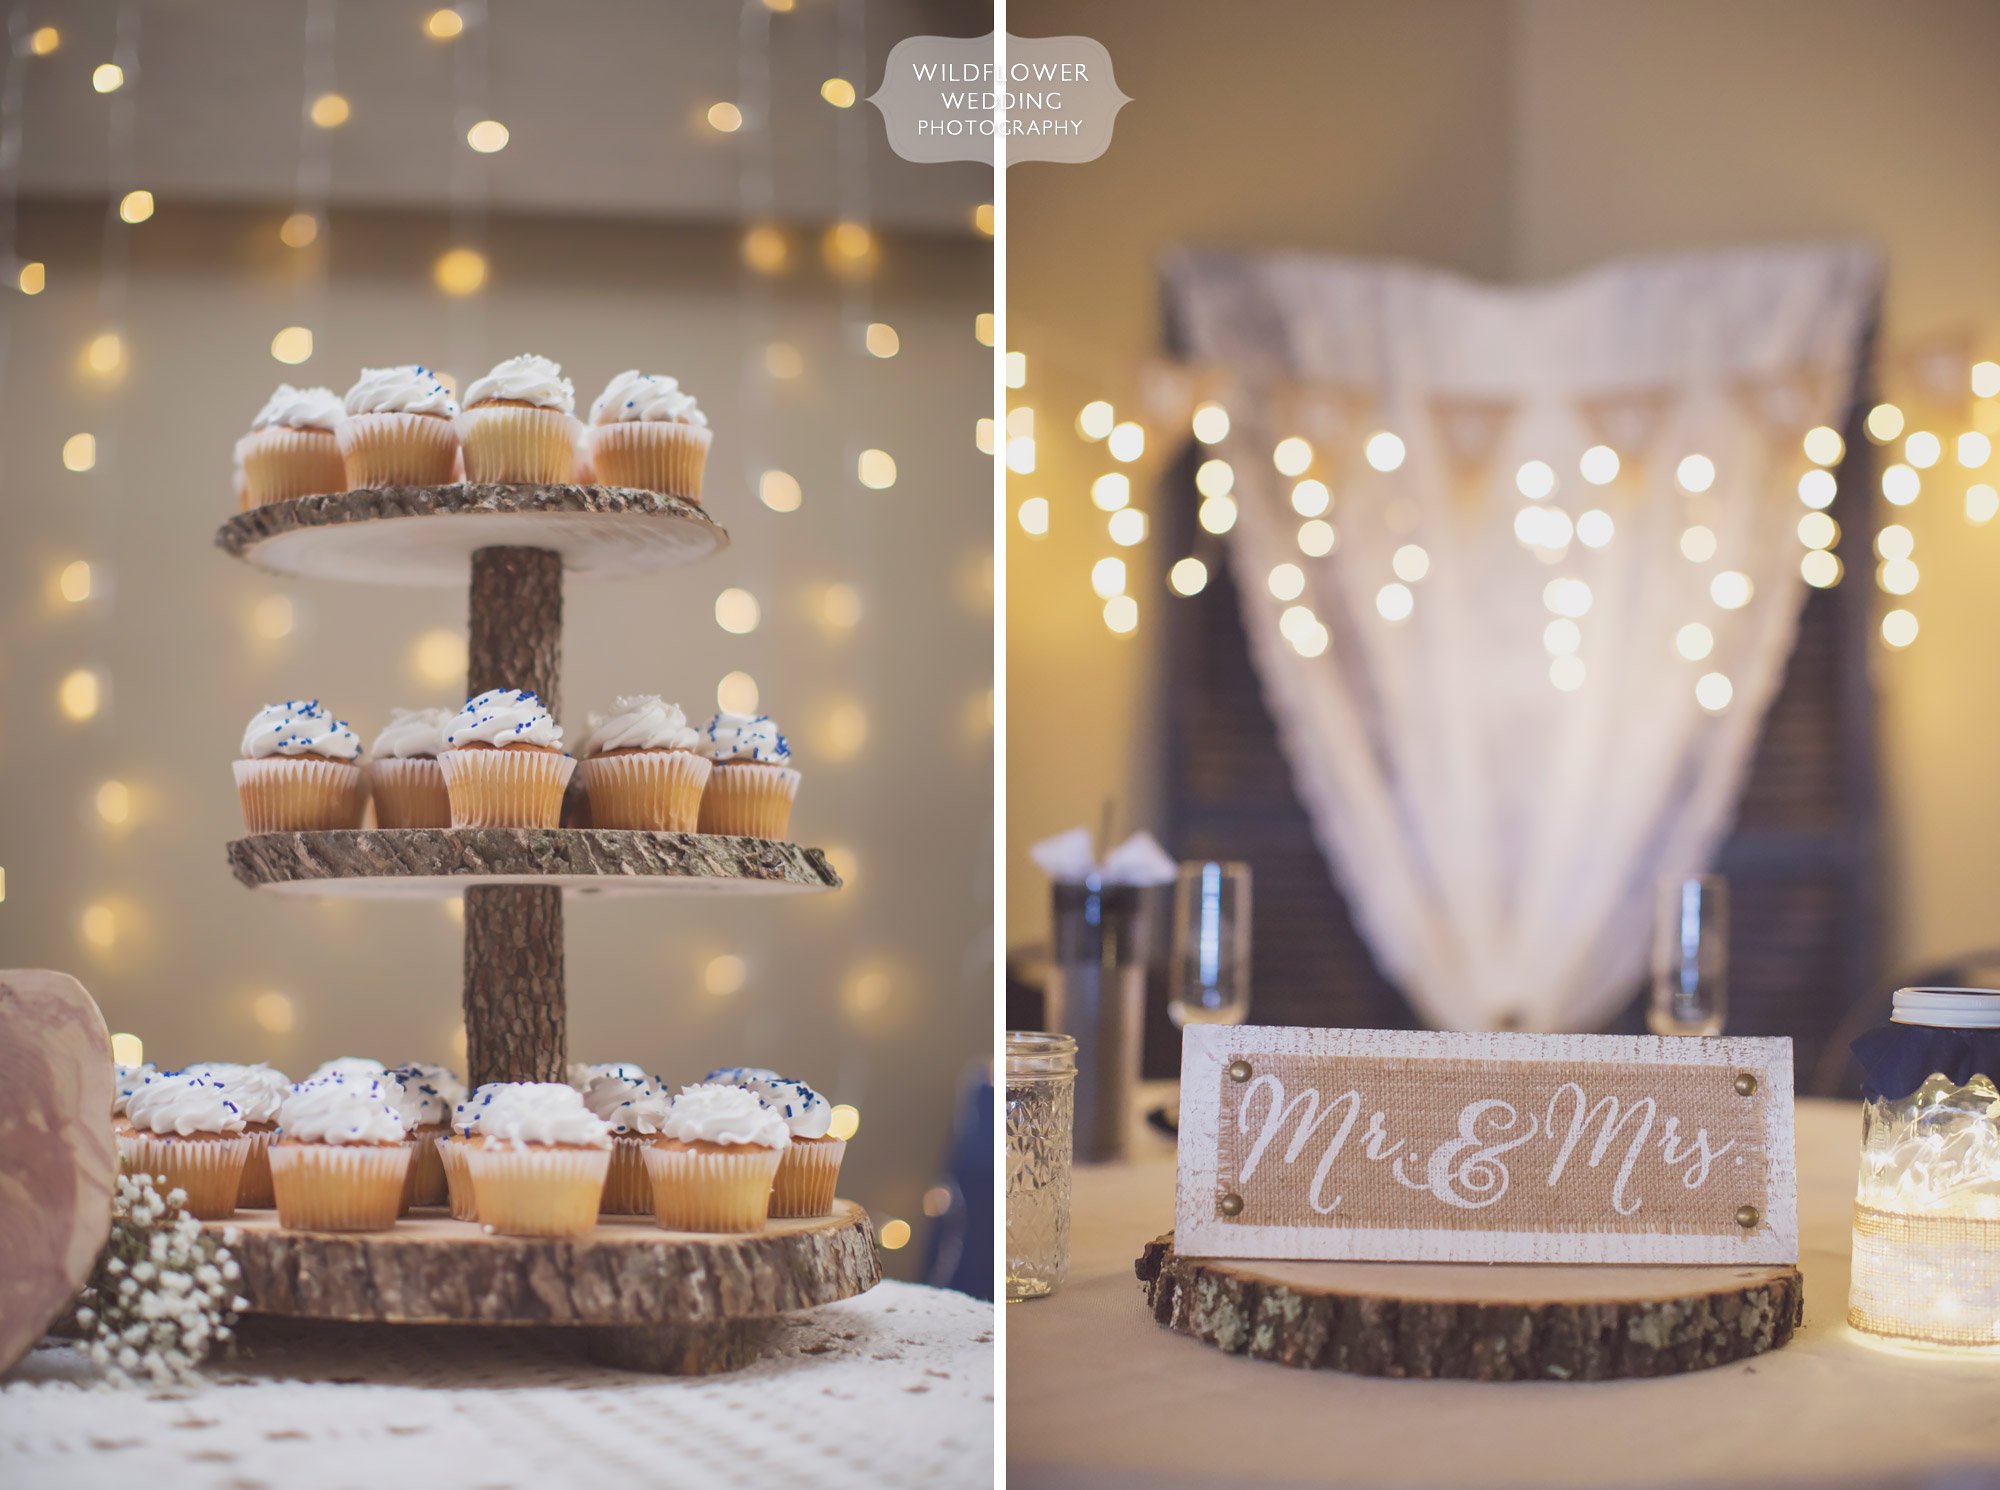 Twinkle lights add so much romantic feeling to this country wedding with burlap and cupcakes in Columbia, MO.